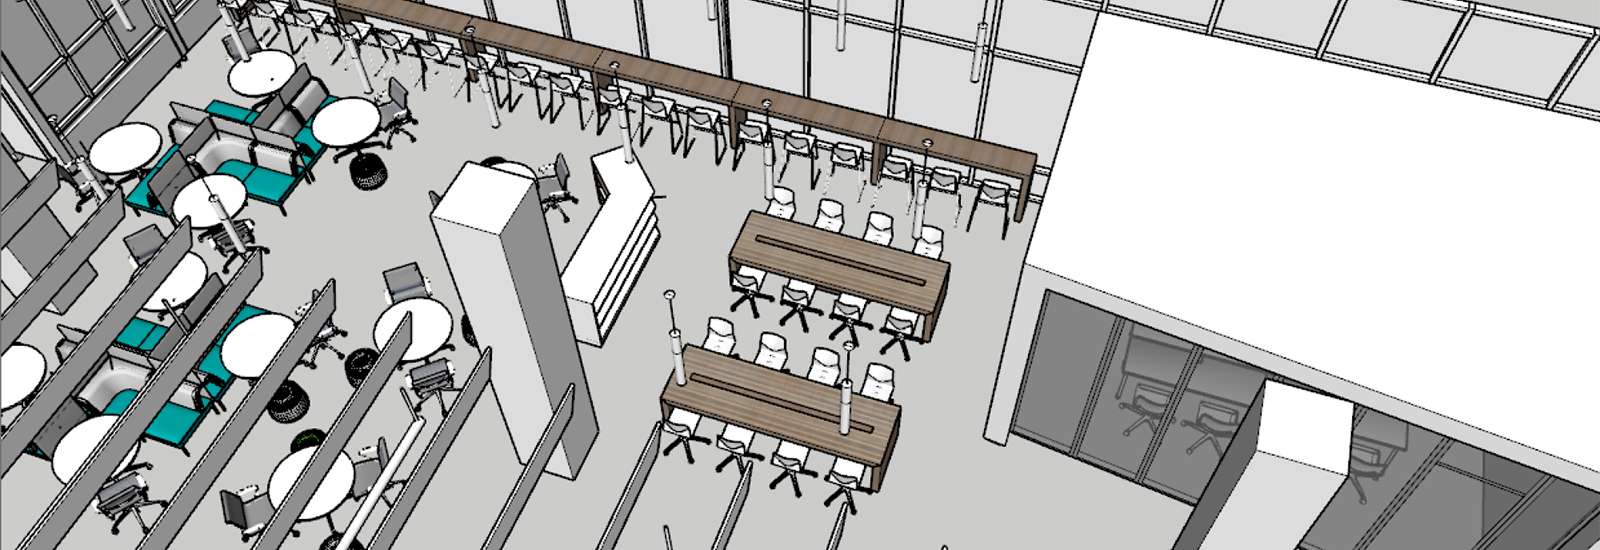 Learning Commons Rendering